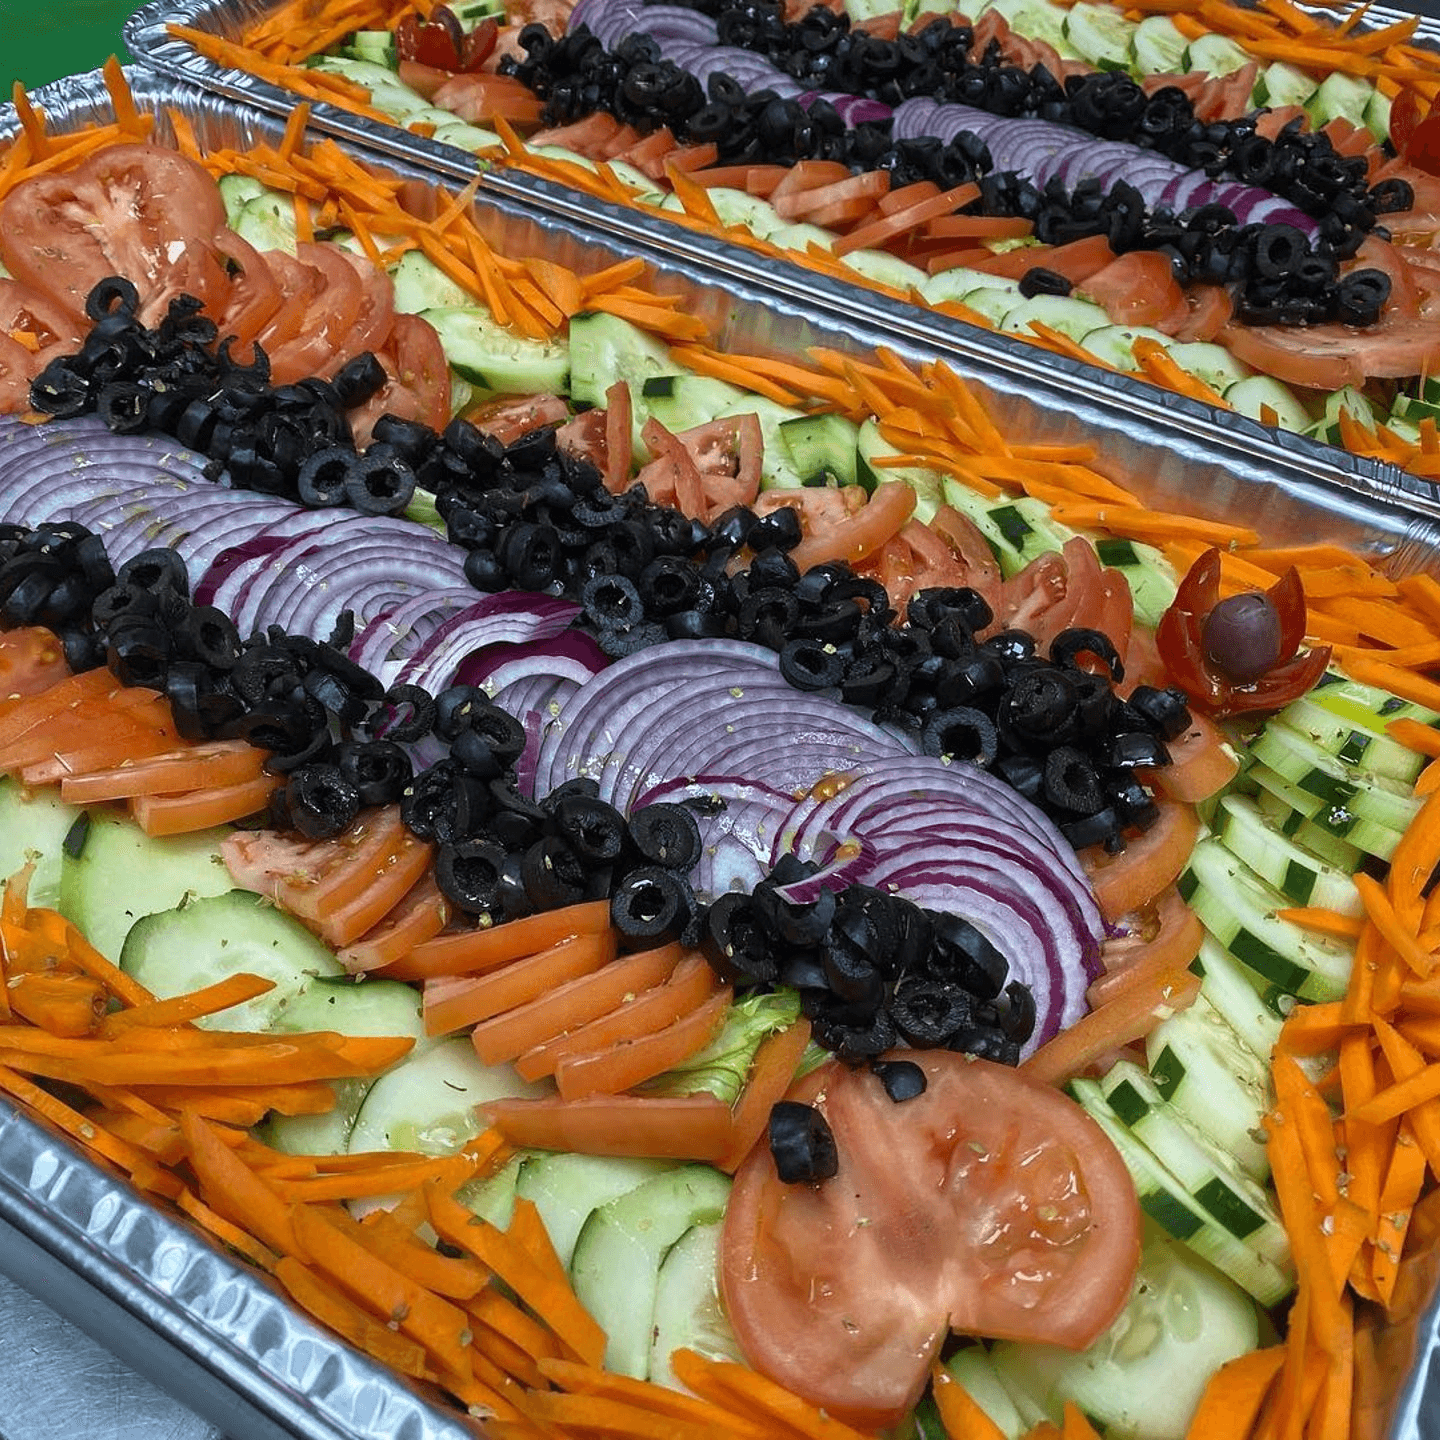 Let us cater your next event!